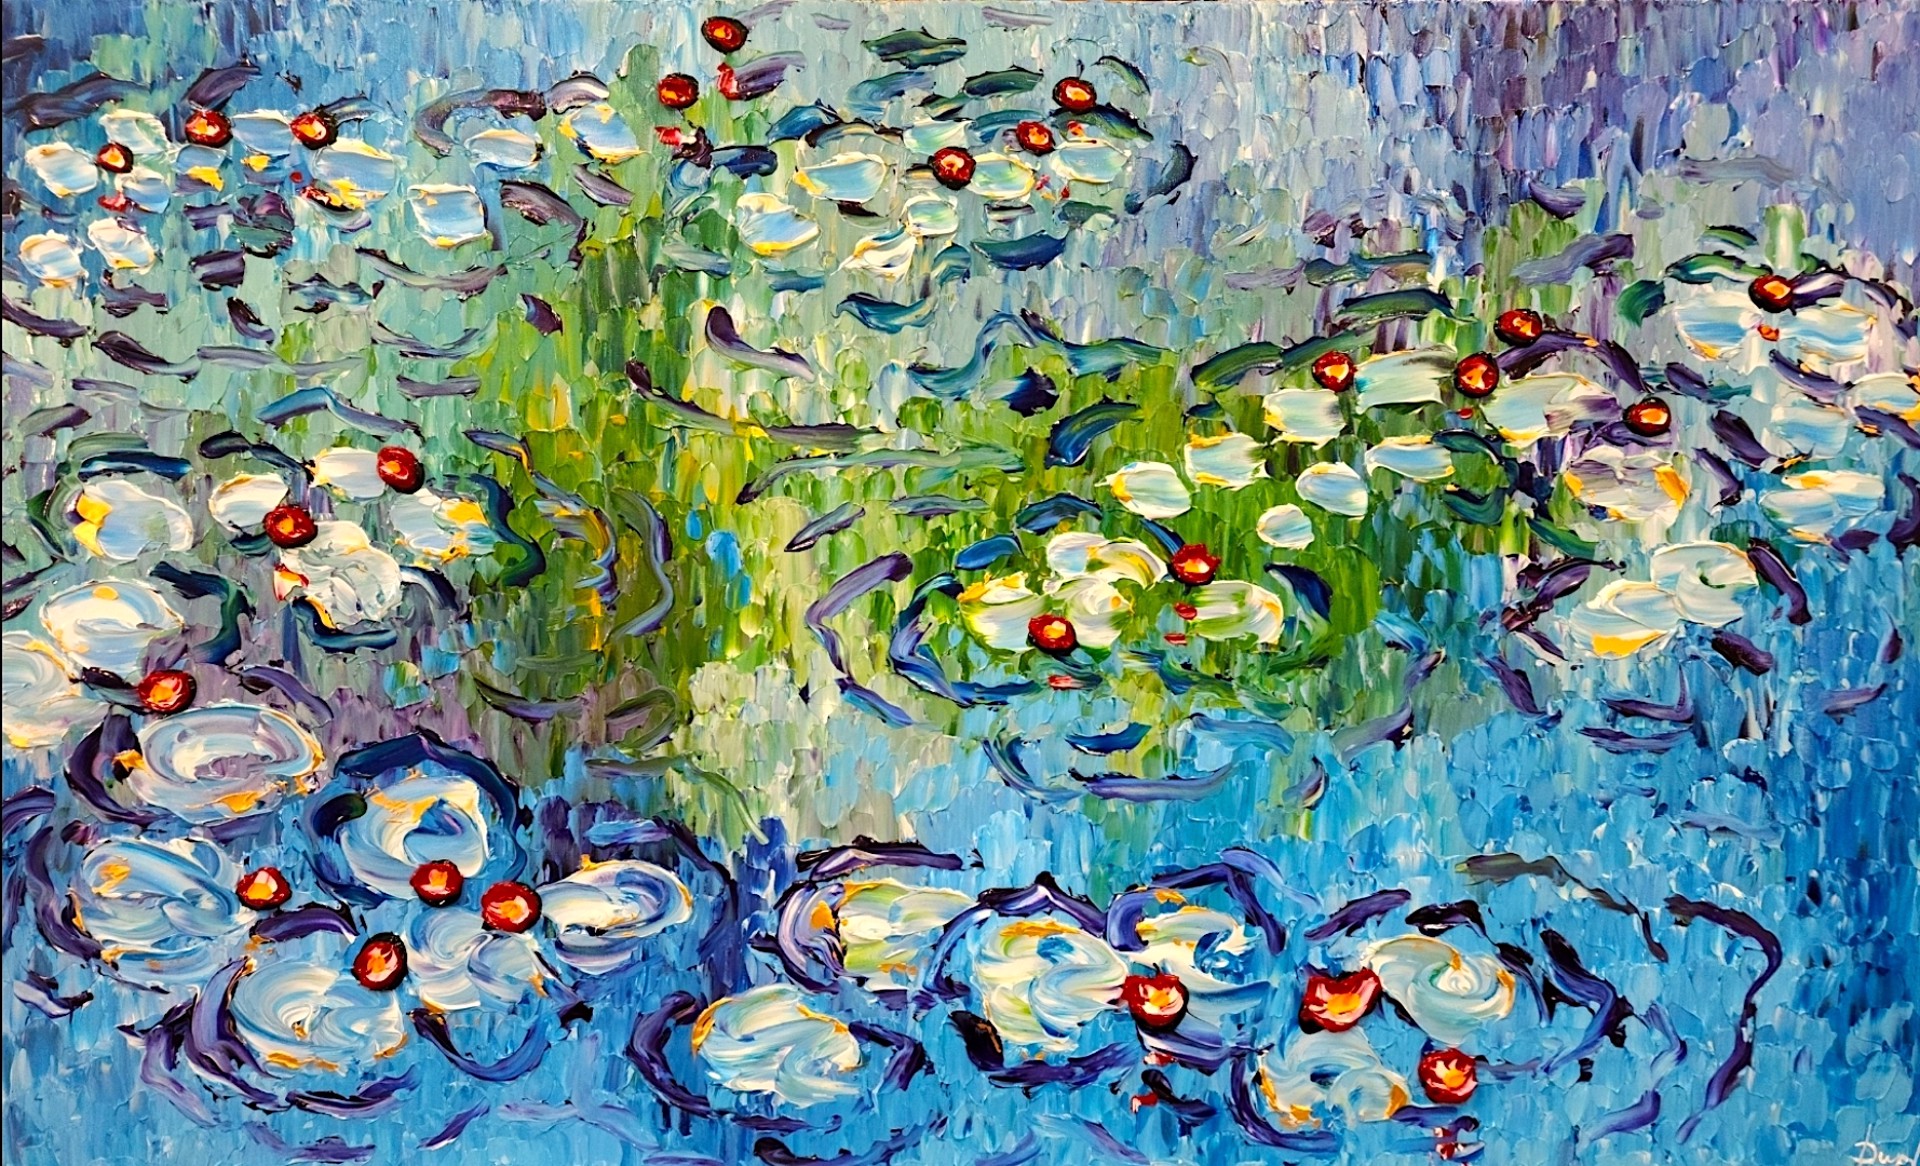 Reflective Waters of the Lily Pond by Isabelle Dupuy